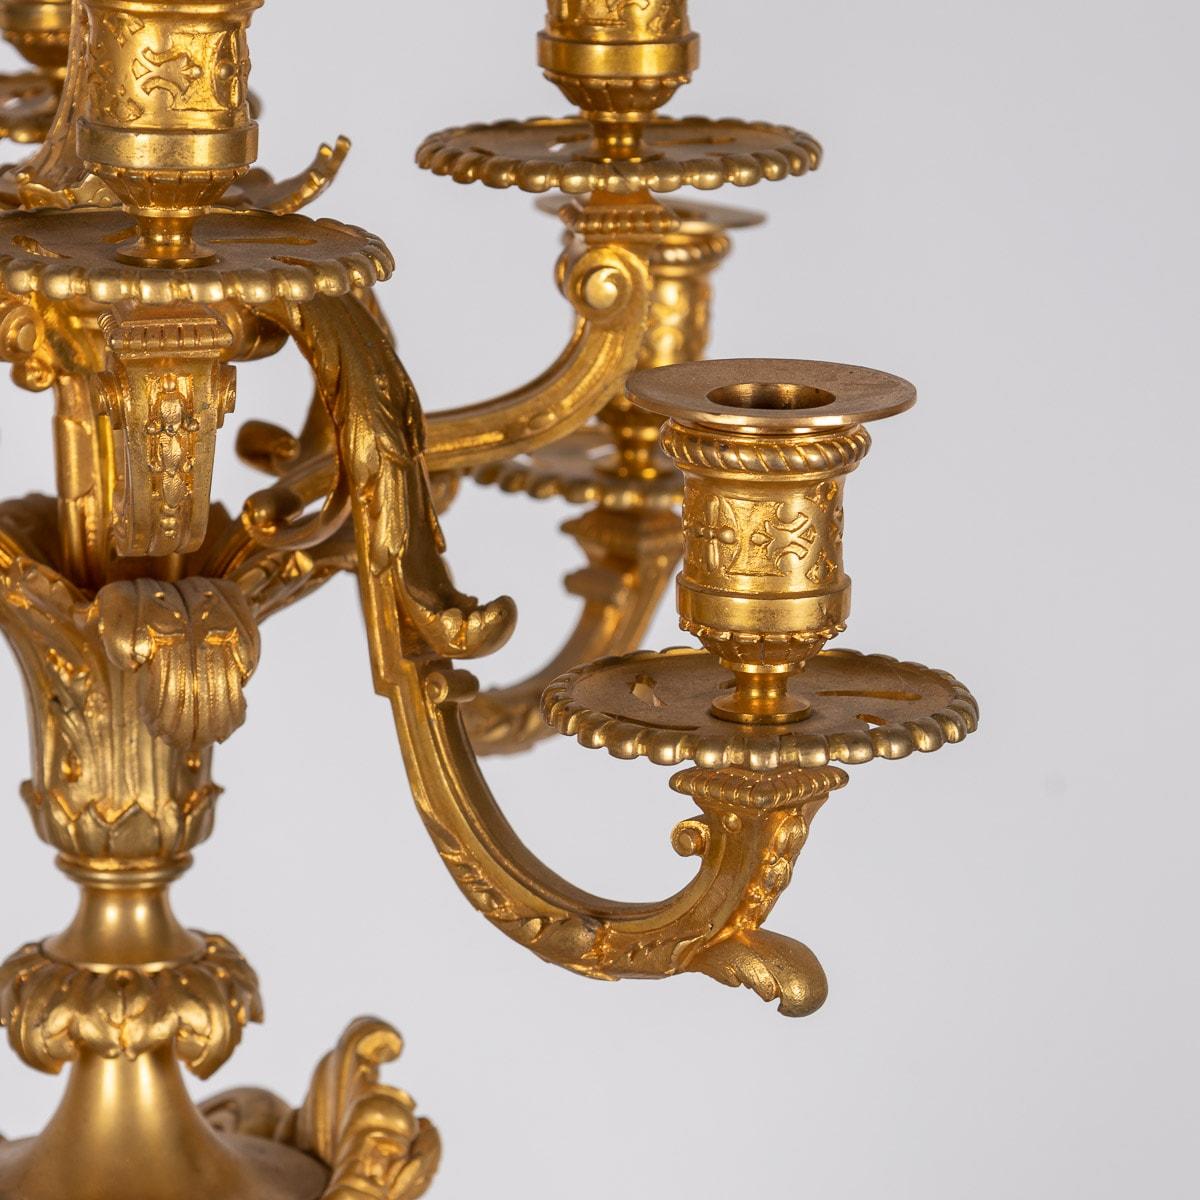 19th Century French Ormolu-Mounted Rouge Griotte Nine-Light Candelabra, c.1870 For Sale 7